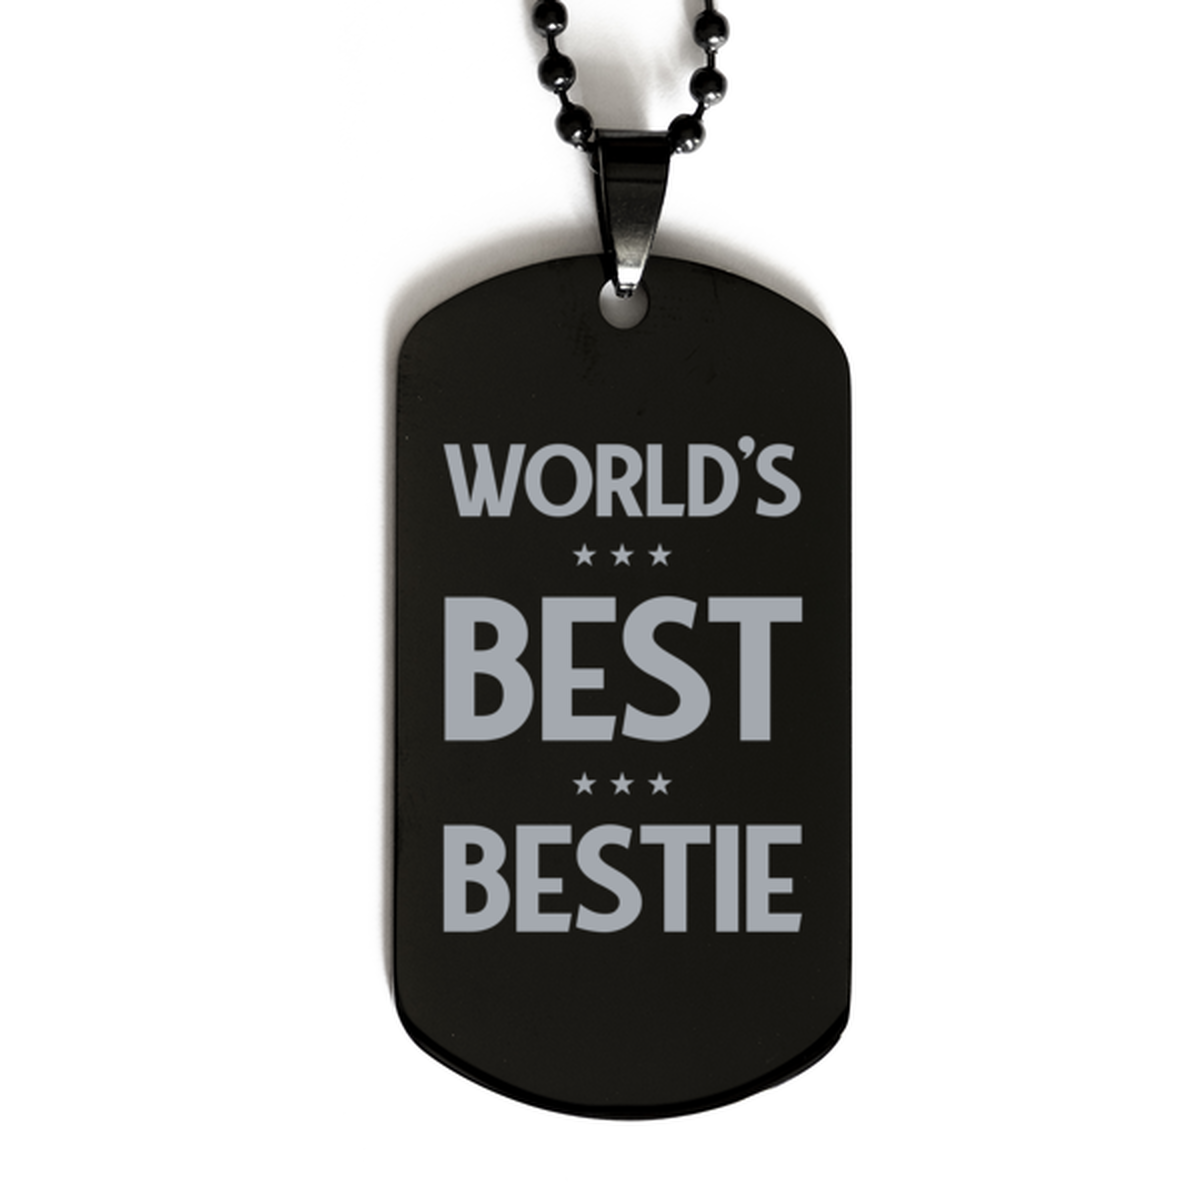 Worlds Best Bestie Gifts, Funny Black Engraved Dog Tag For Bestie, Birthday Presents For Men Women